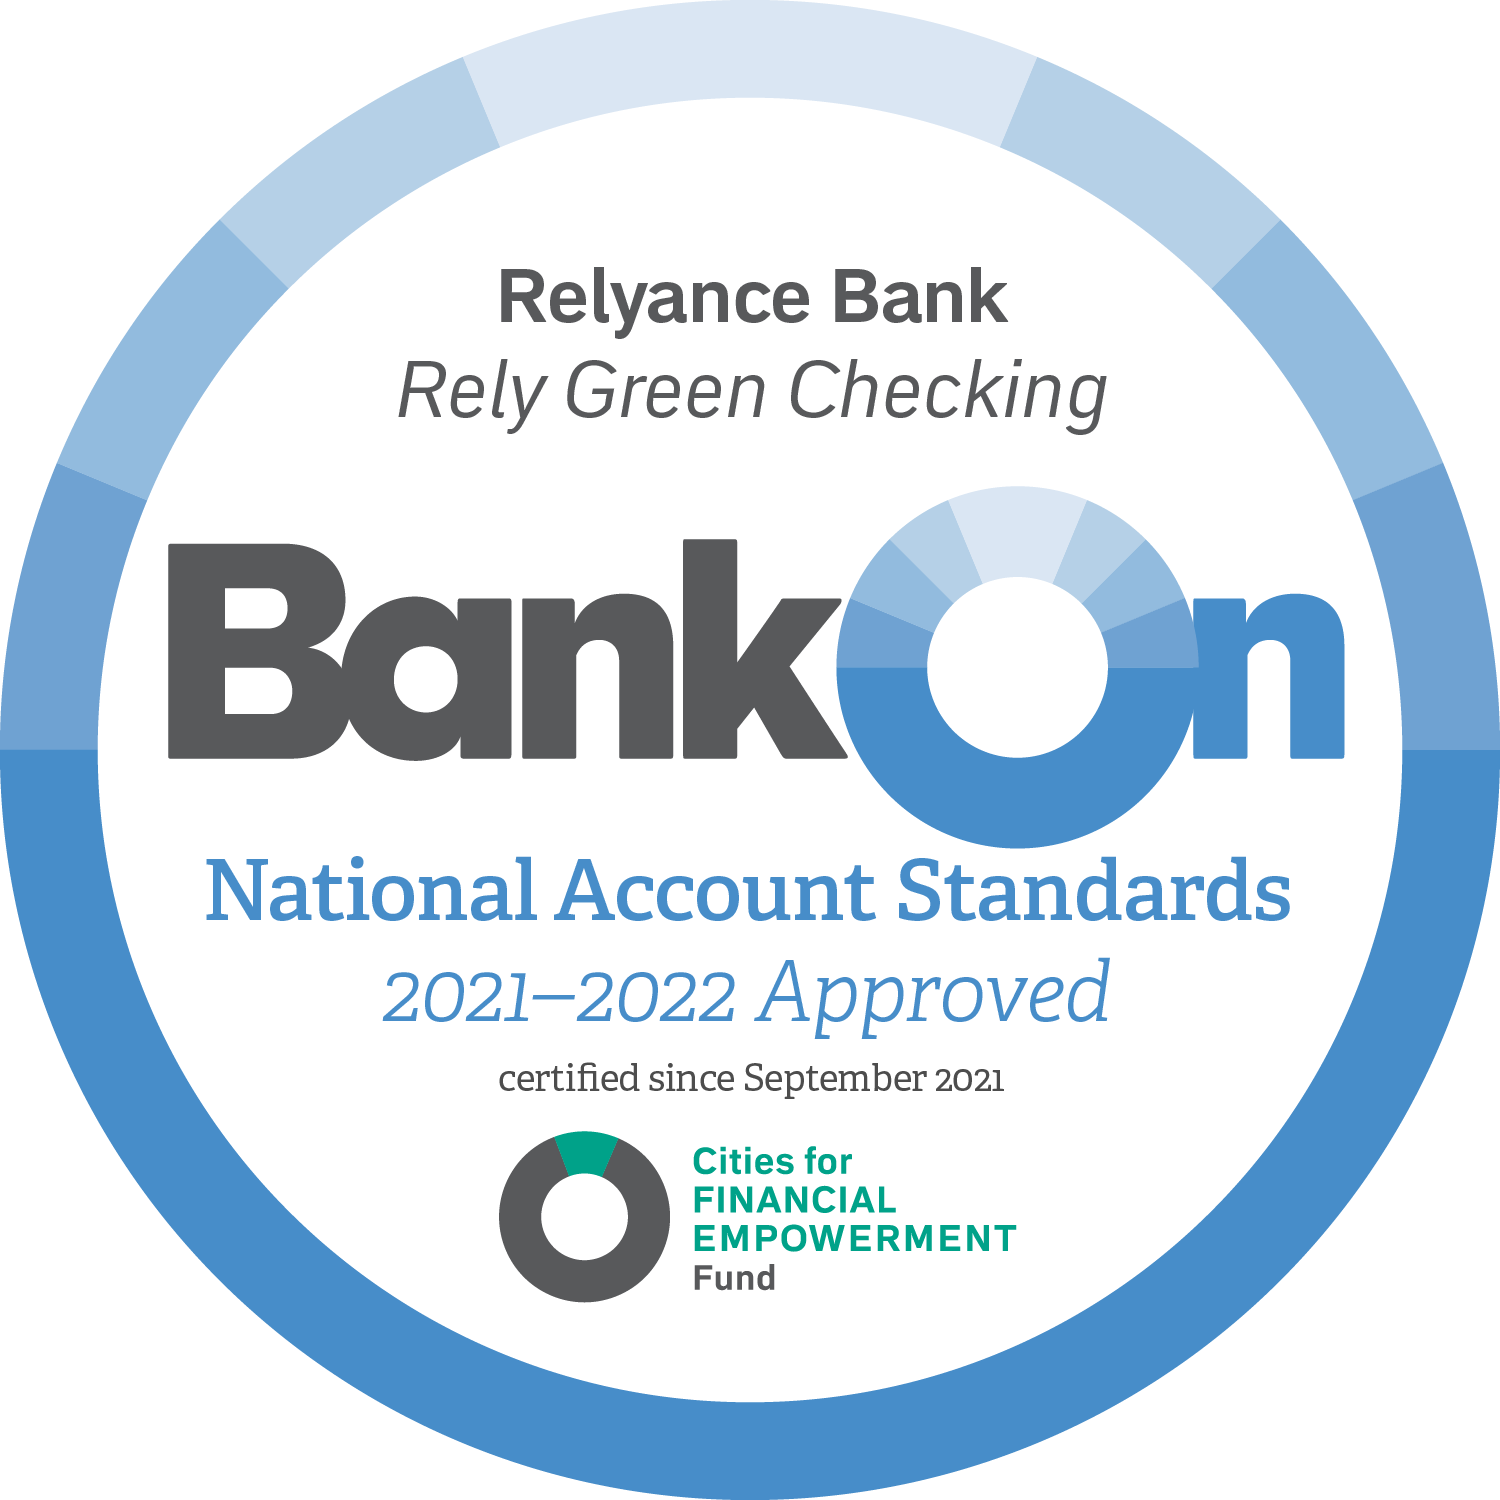 Relyance Bank Rely Green Checking BankOn National Account Standards 2021-2022 Approved certified since September 2021 Cities for Financial Empowerment Fund